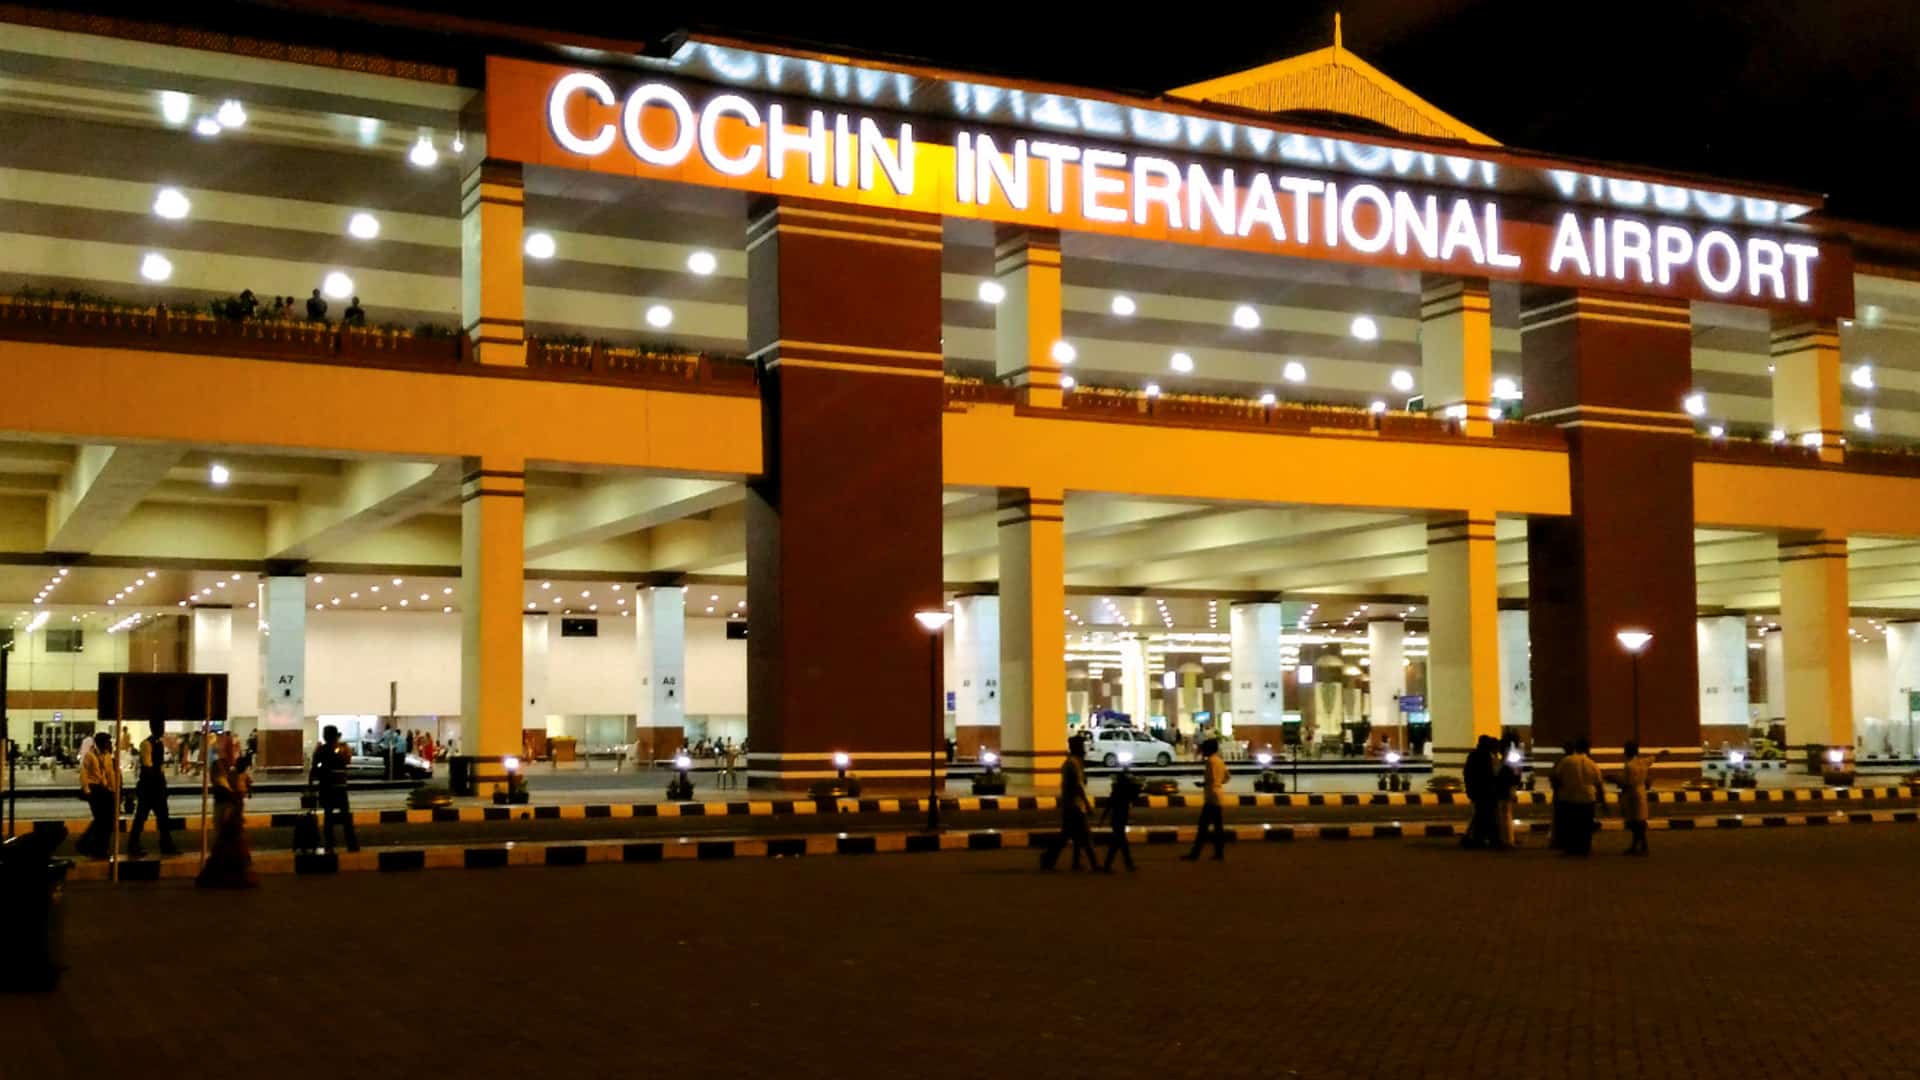 Cochin airport gets global award for excellent service quality